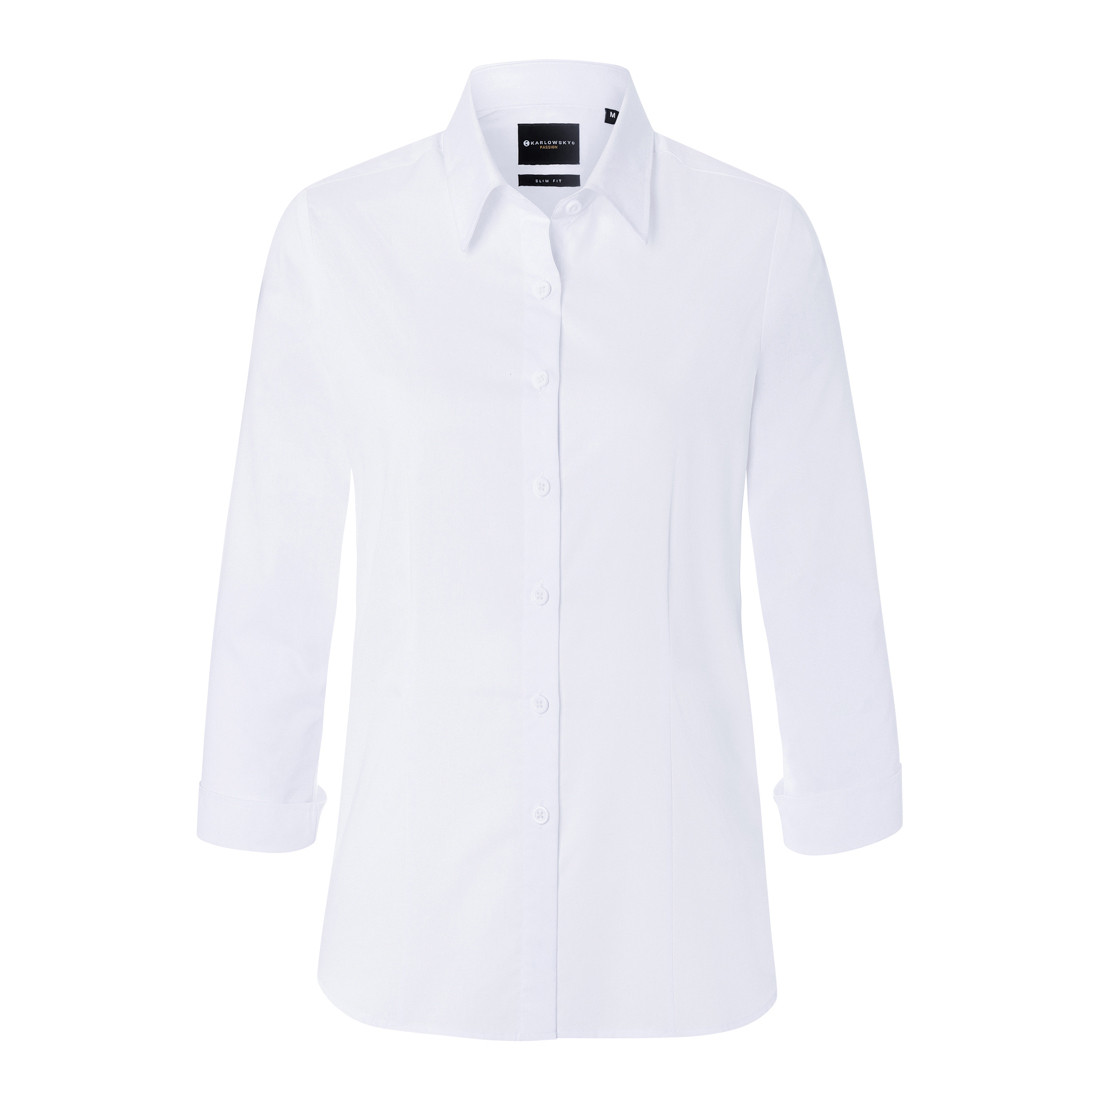 Ladies' Blouse Classic - Safetywear